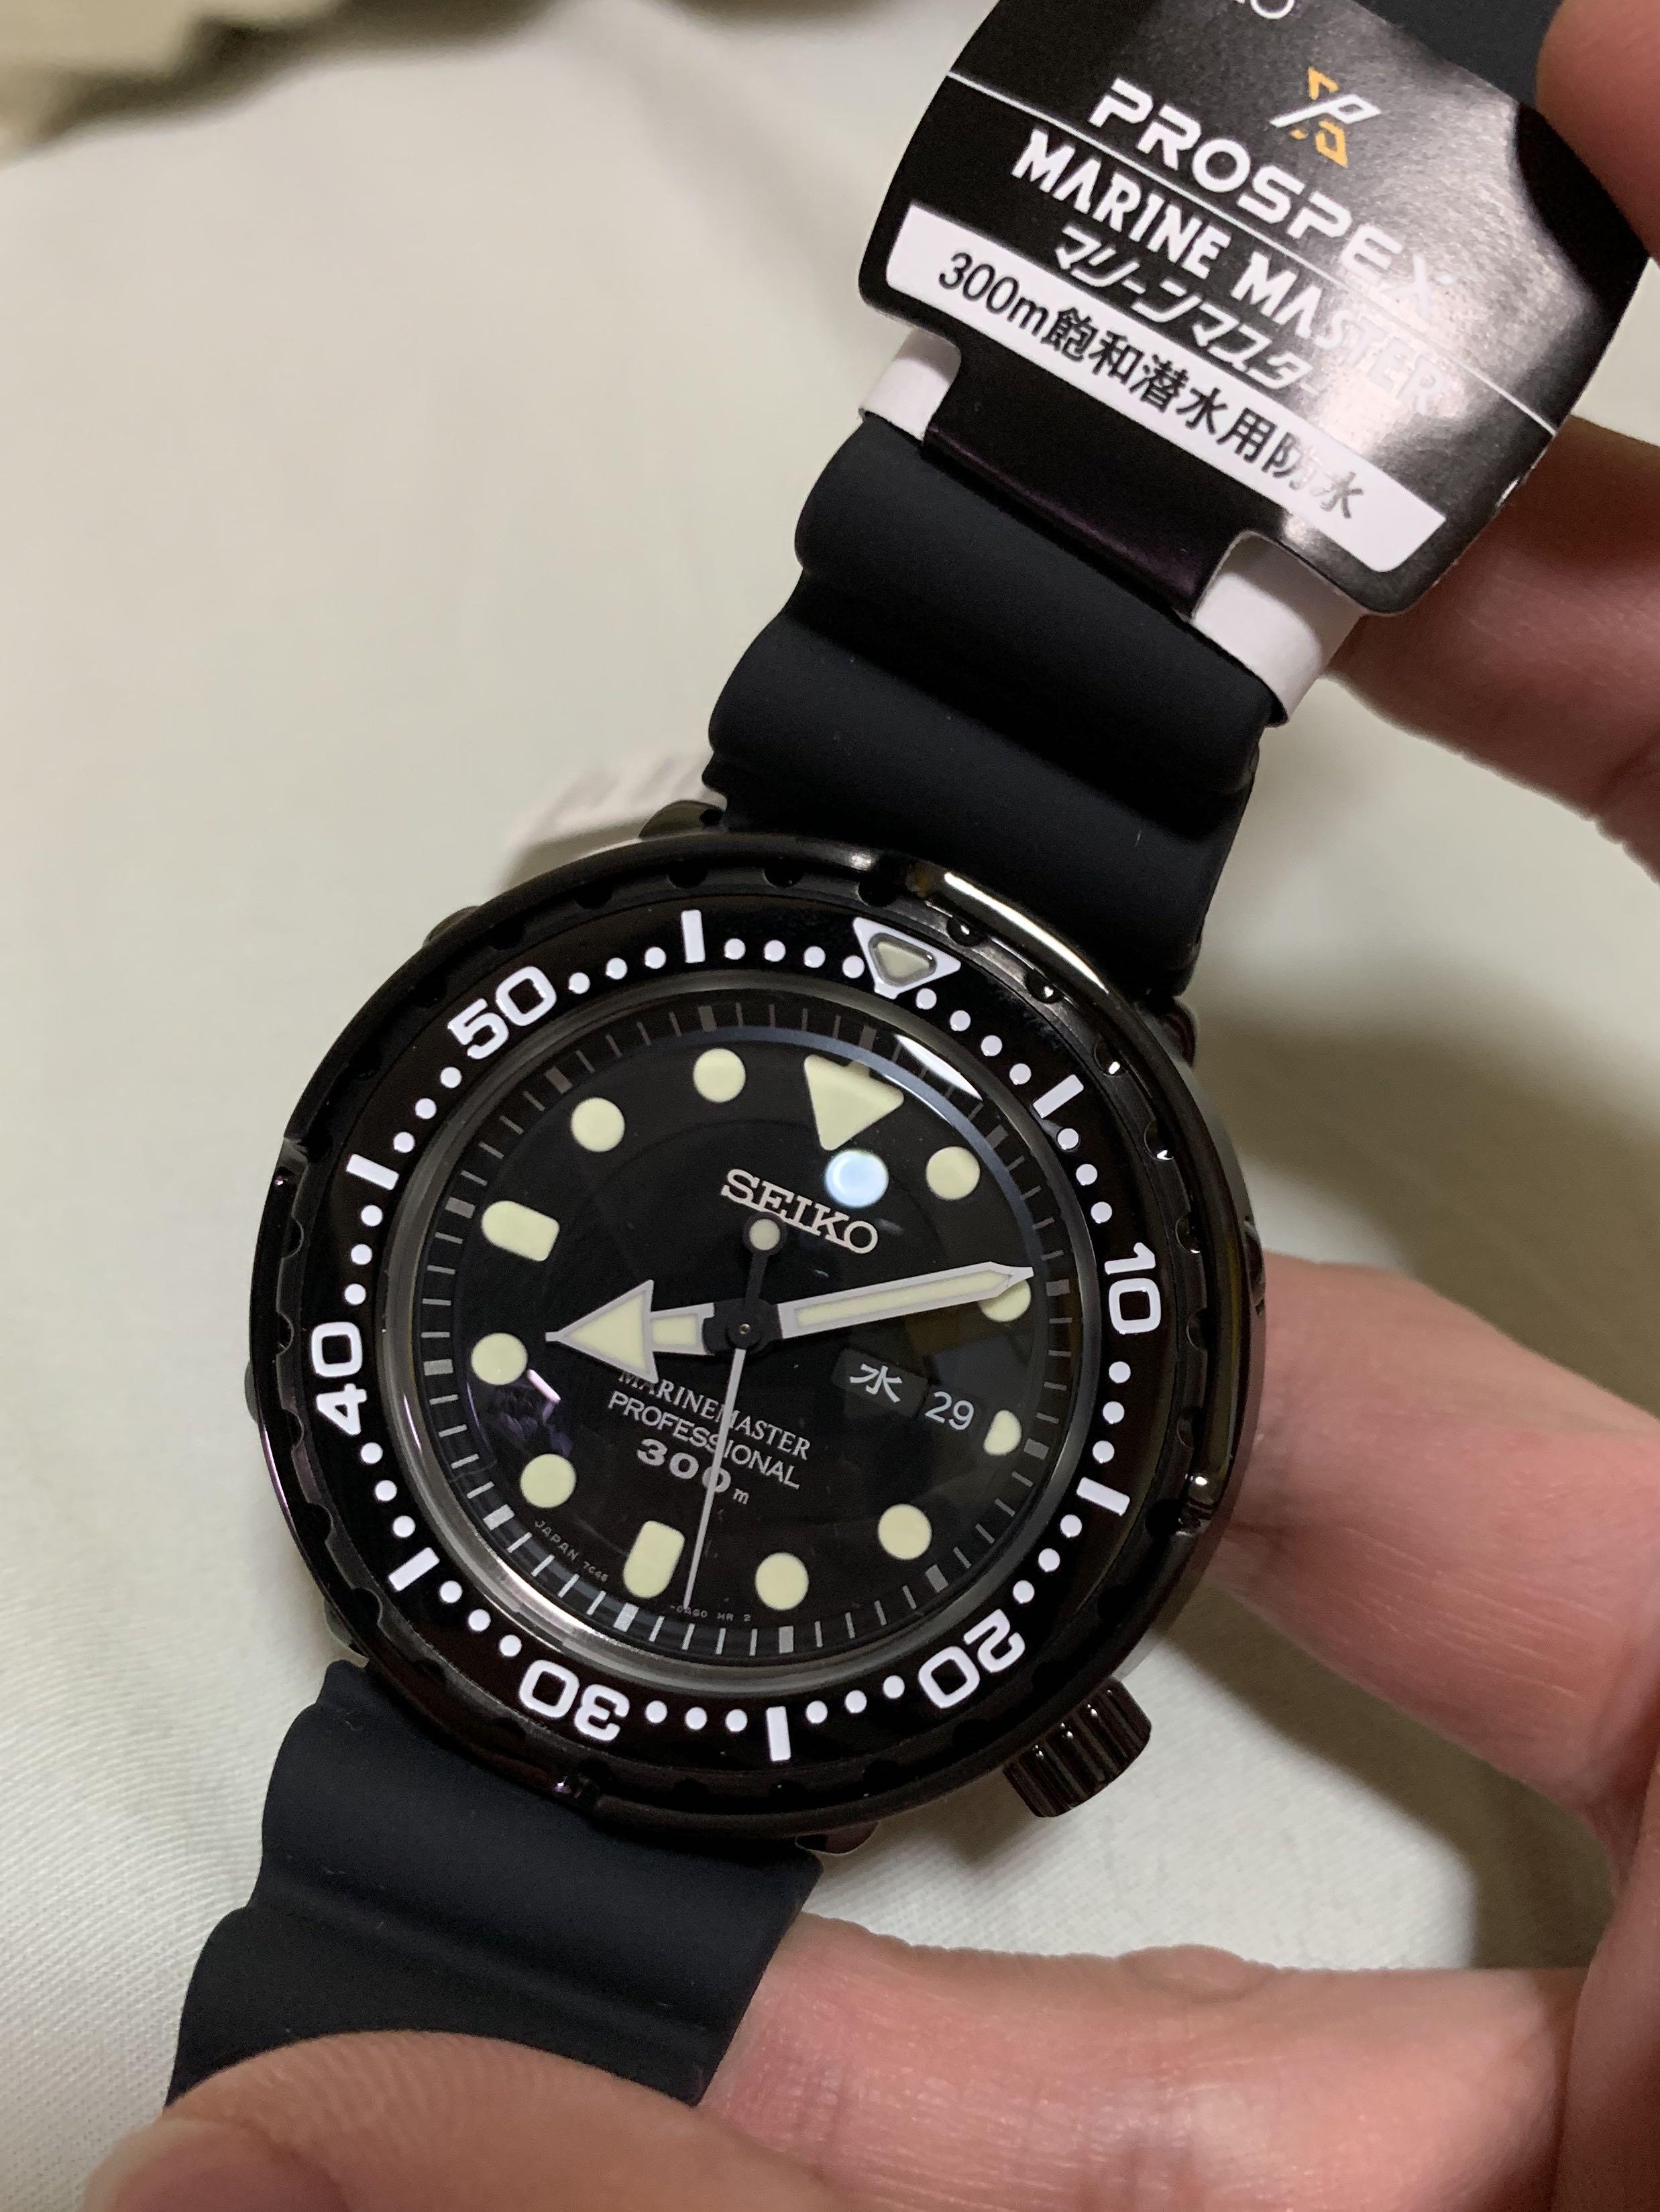 Brand New In Box Seiko Prospex Marine Master Tuna 300 Black SBBN035 For Sale!,  Mobile Phones & Gadgets, Wearables & Smart Watches on Carousell